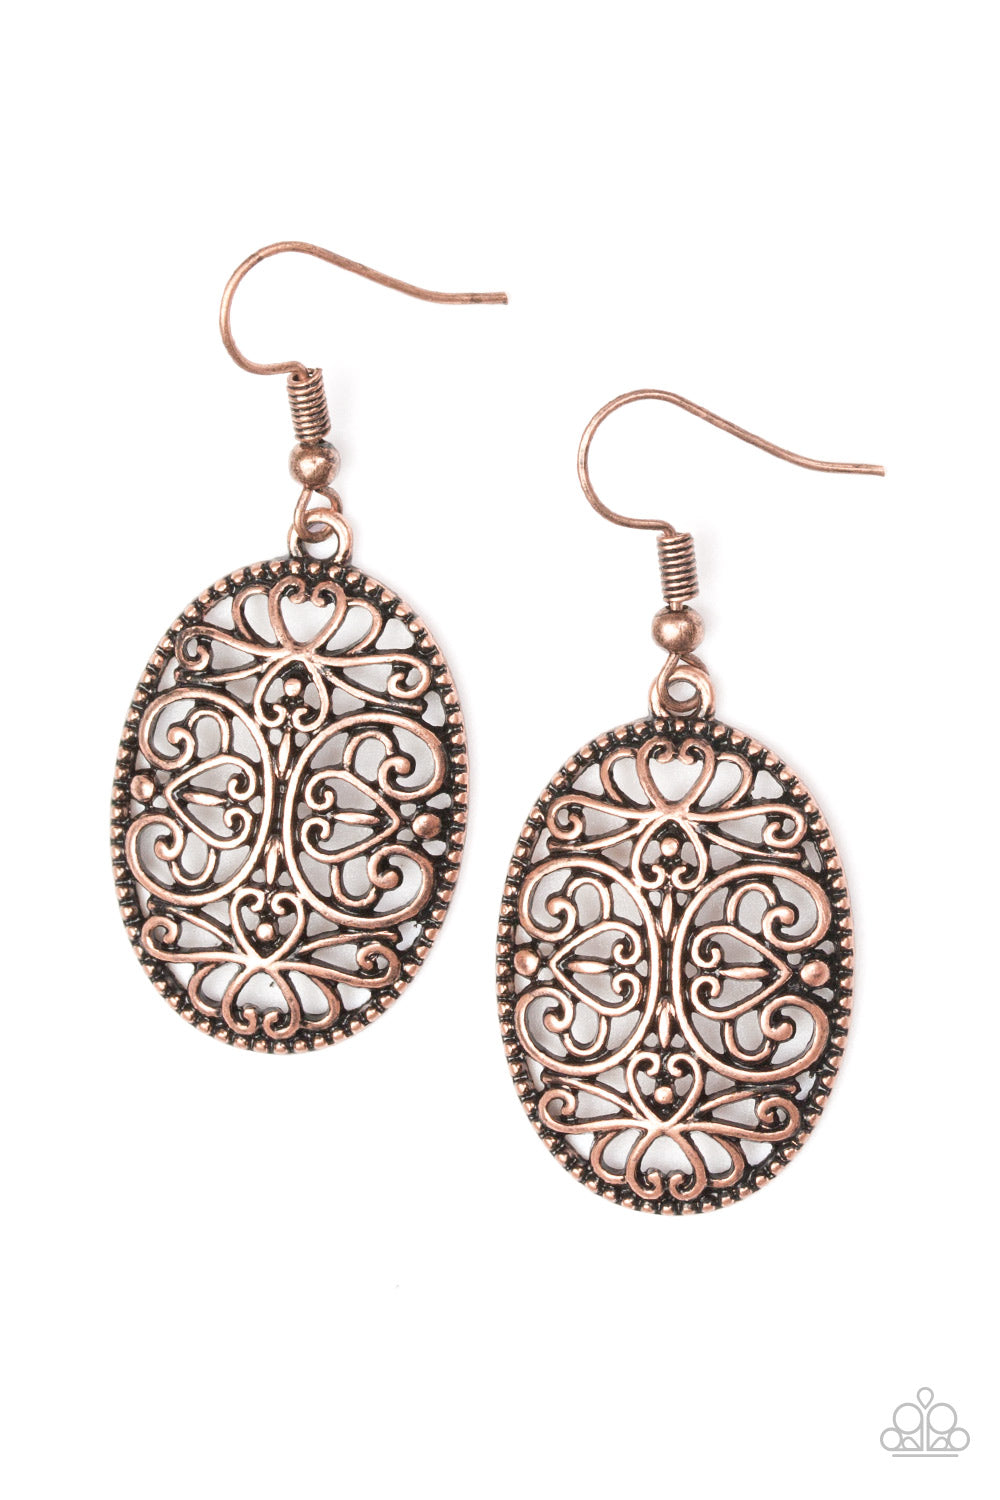 Paparazzi Wistfully Whimsical - Copper Earrings